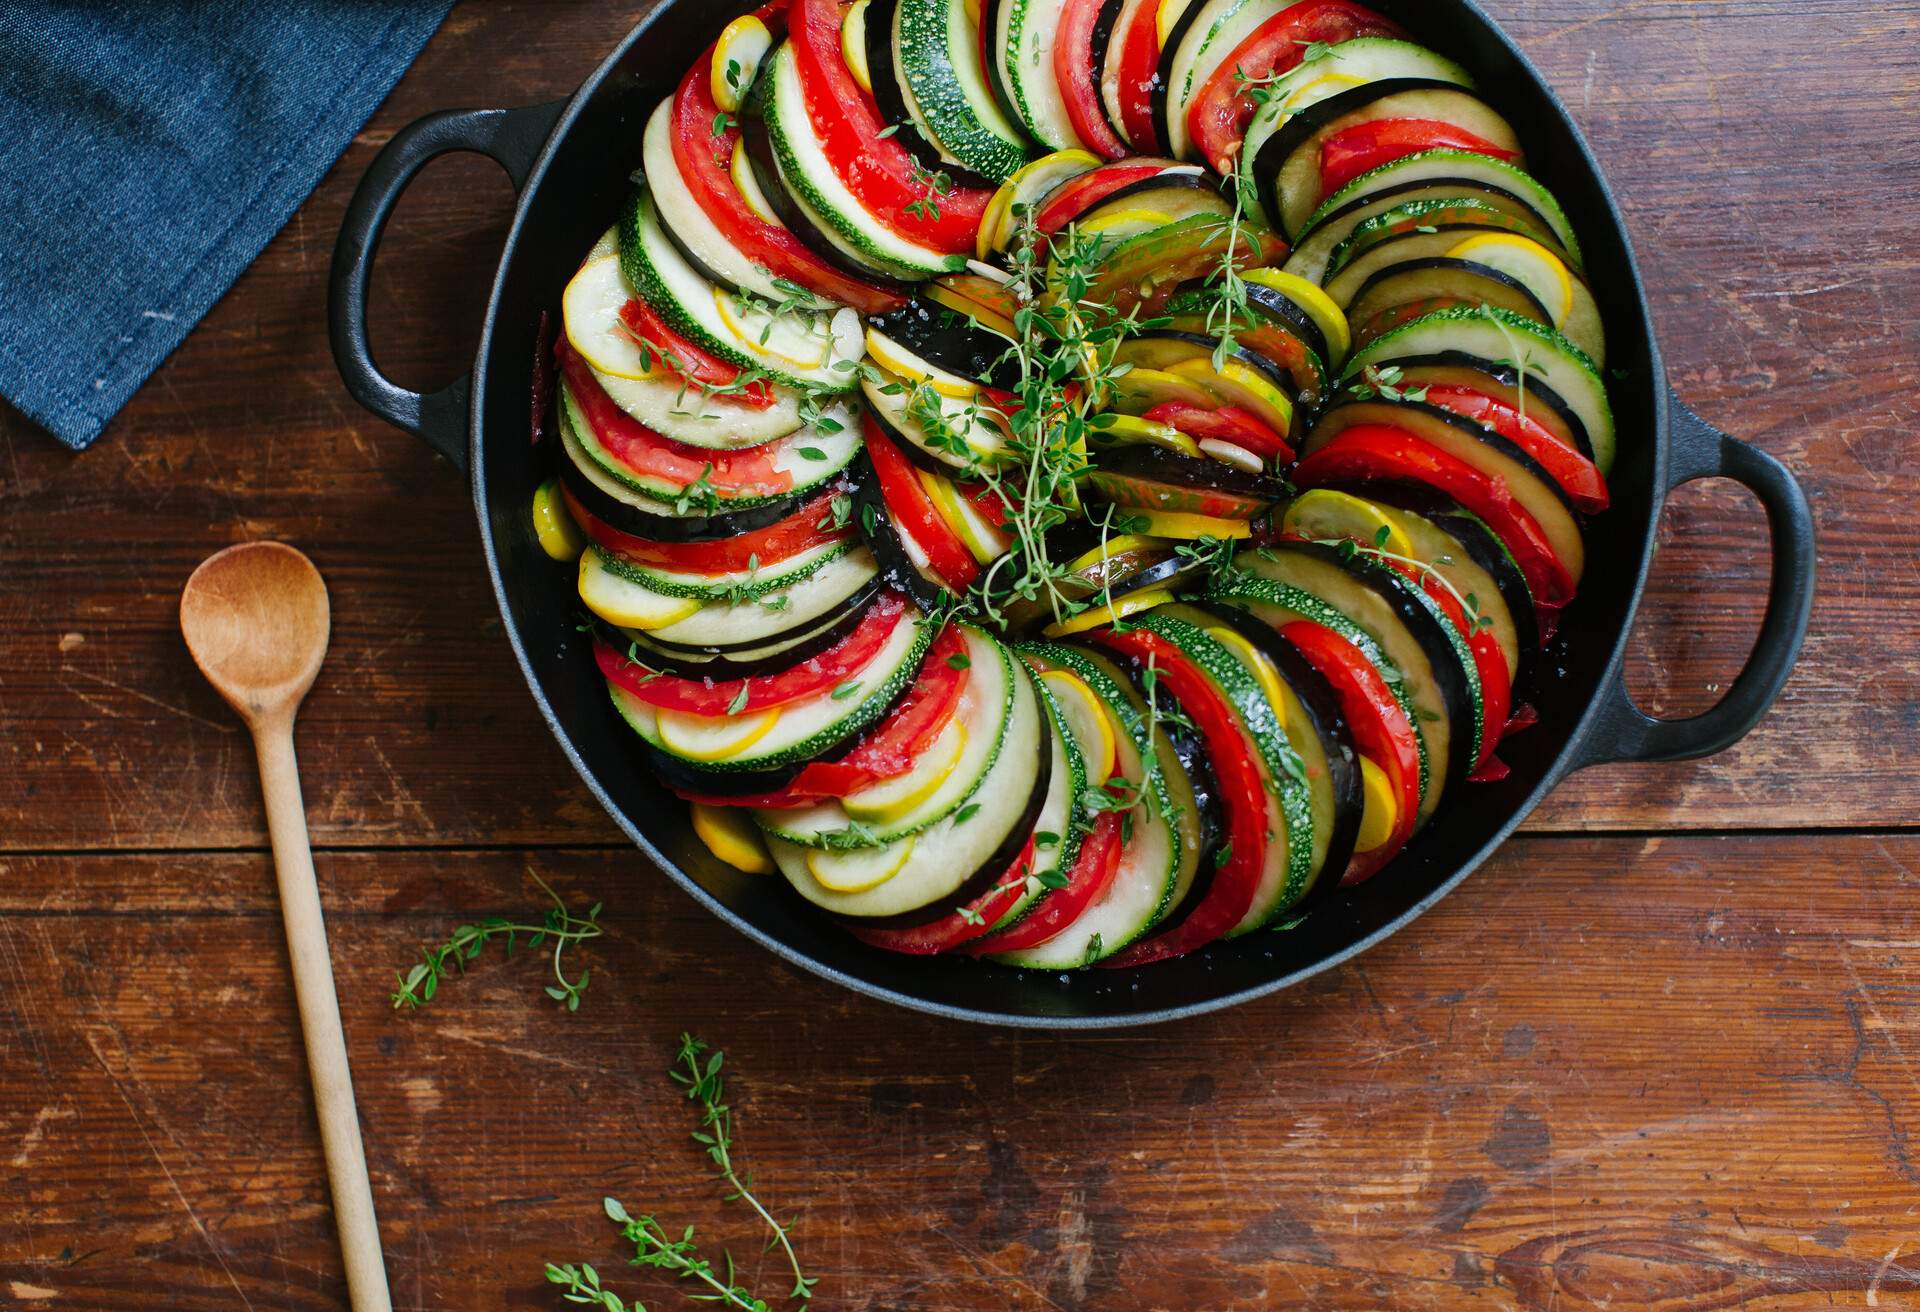 Vegetables Ratatouille with eggplants, Zucchini and tomatoes.